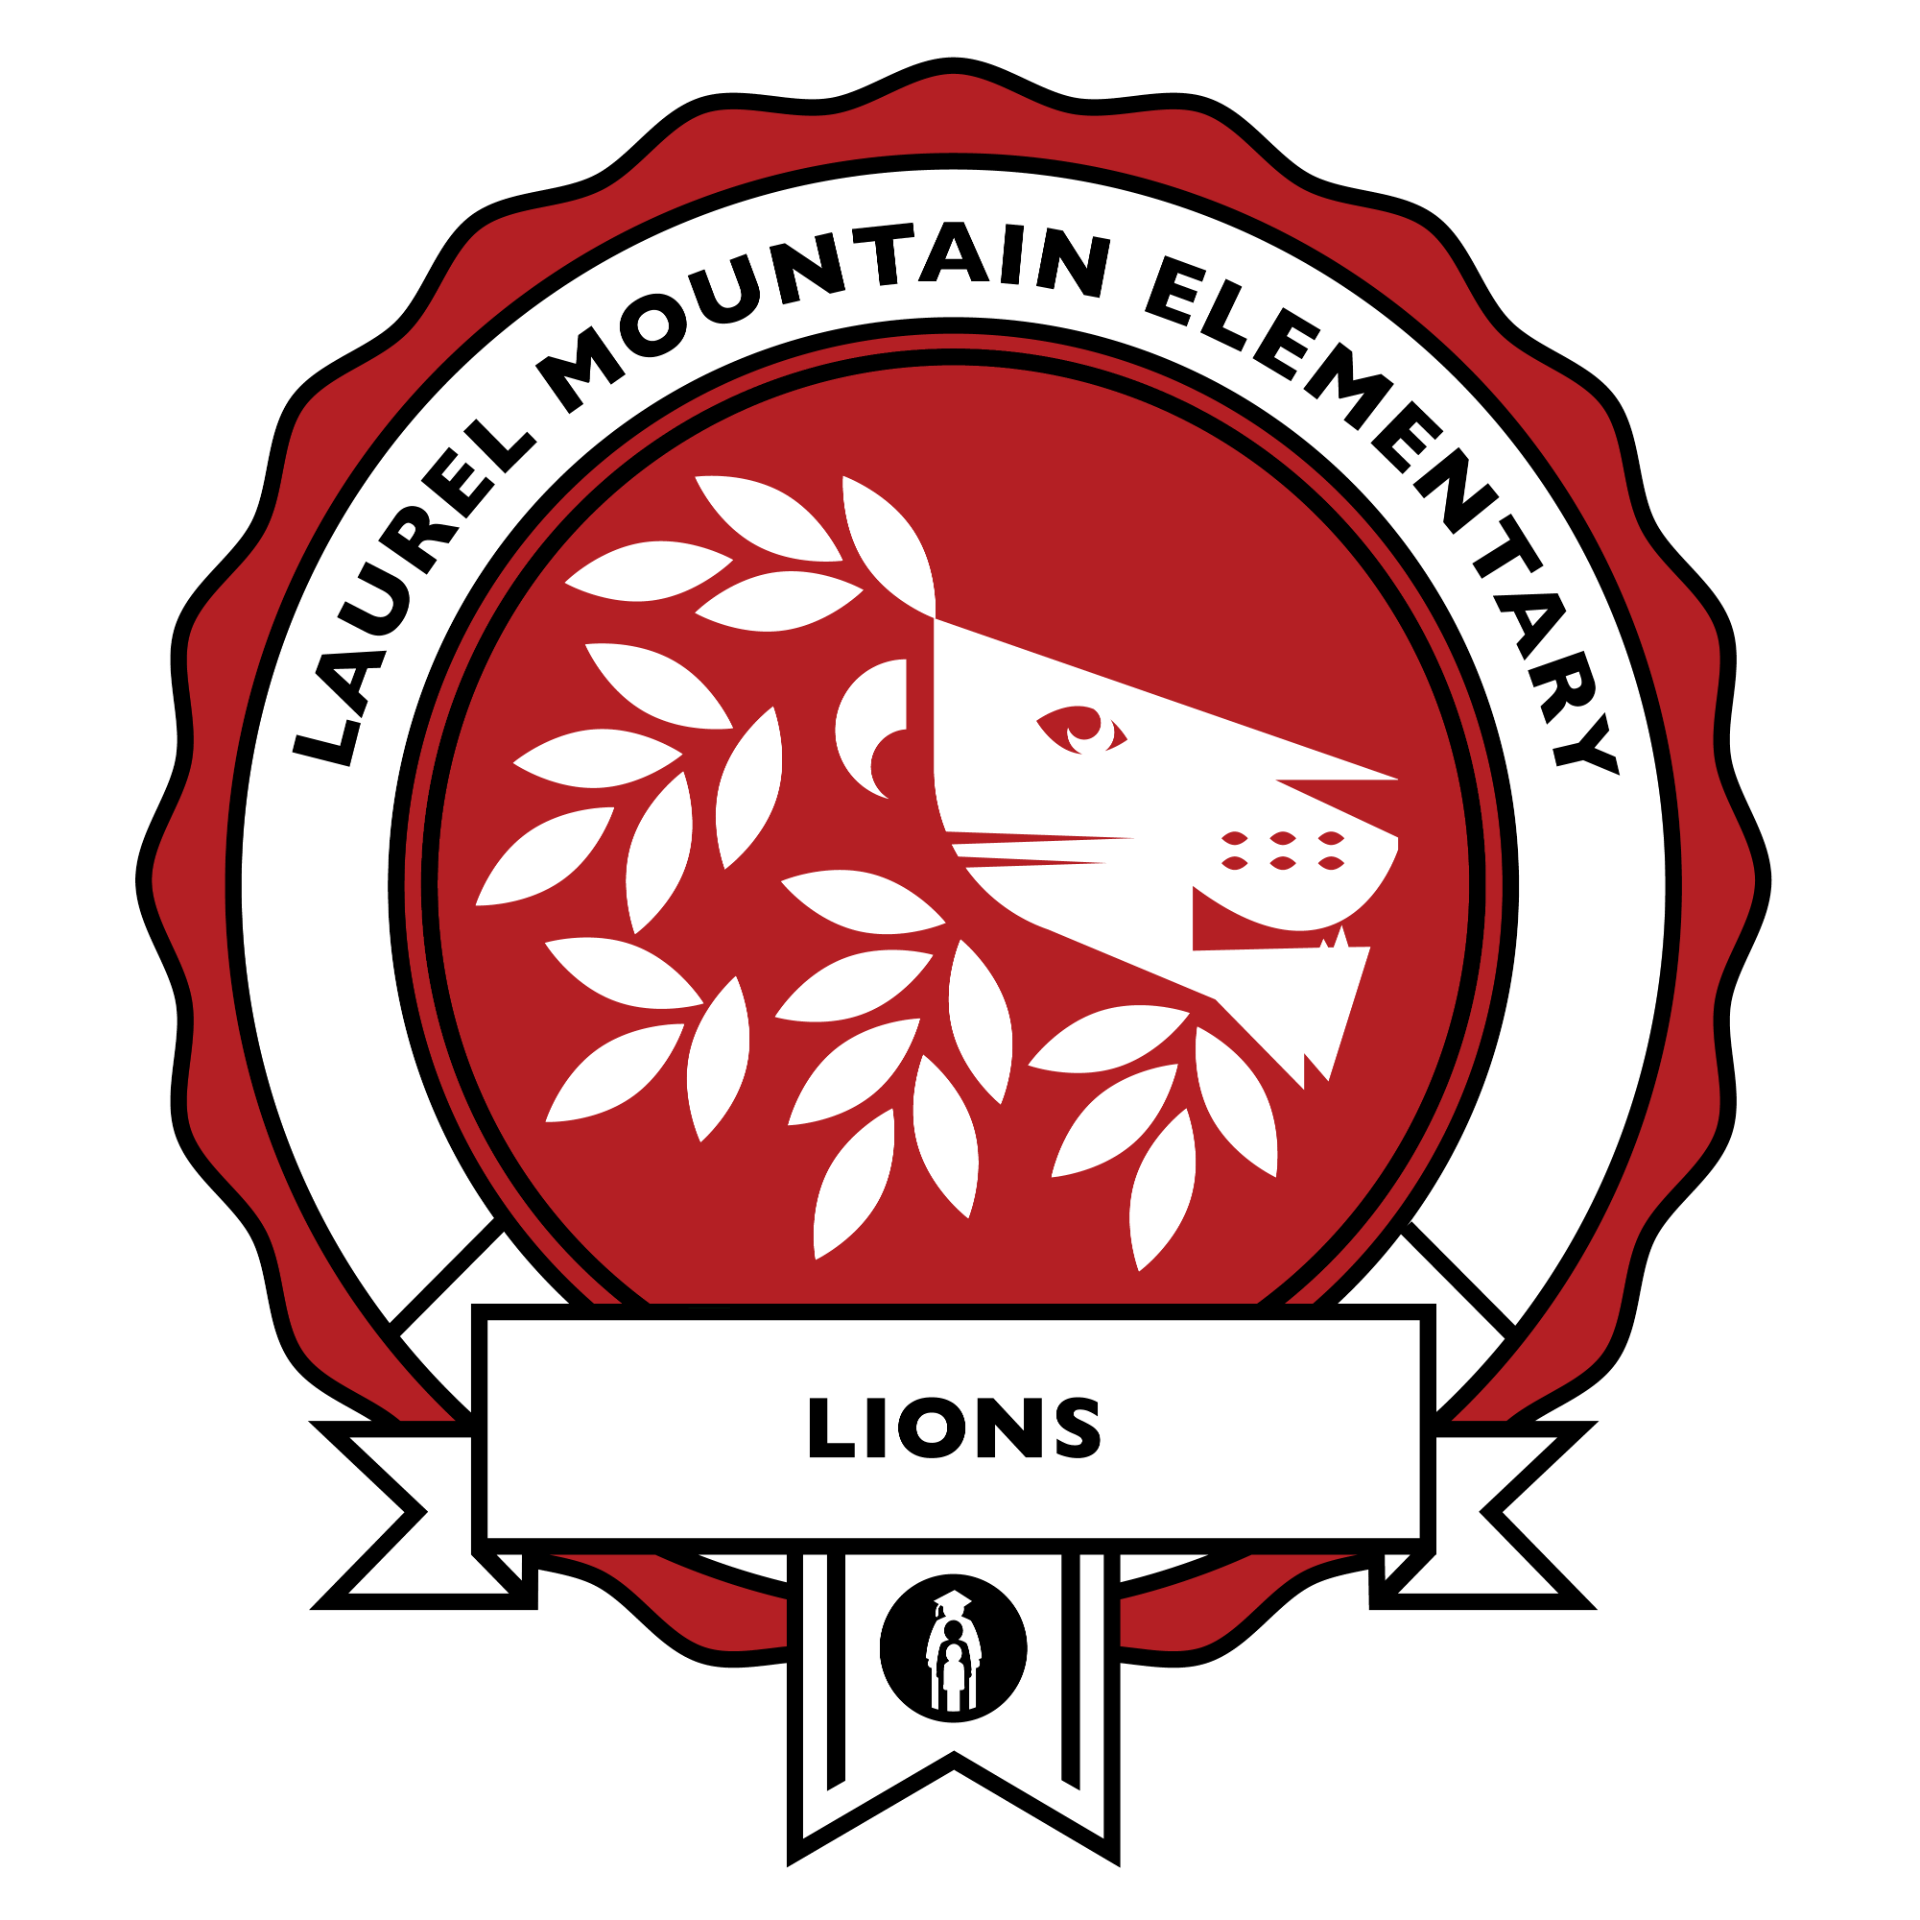 Laurel Mountain Elementary School - home of the Lions